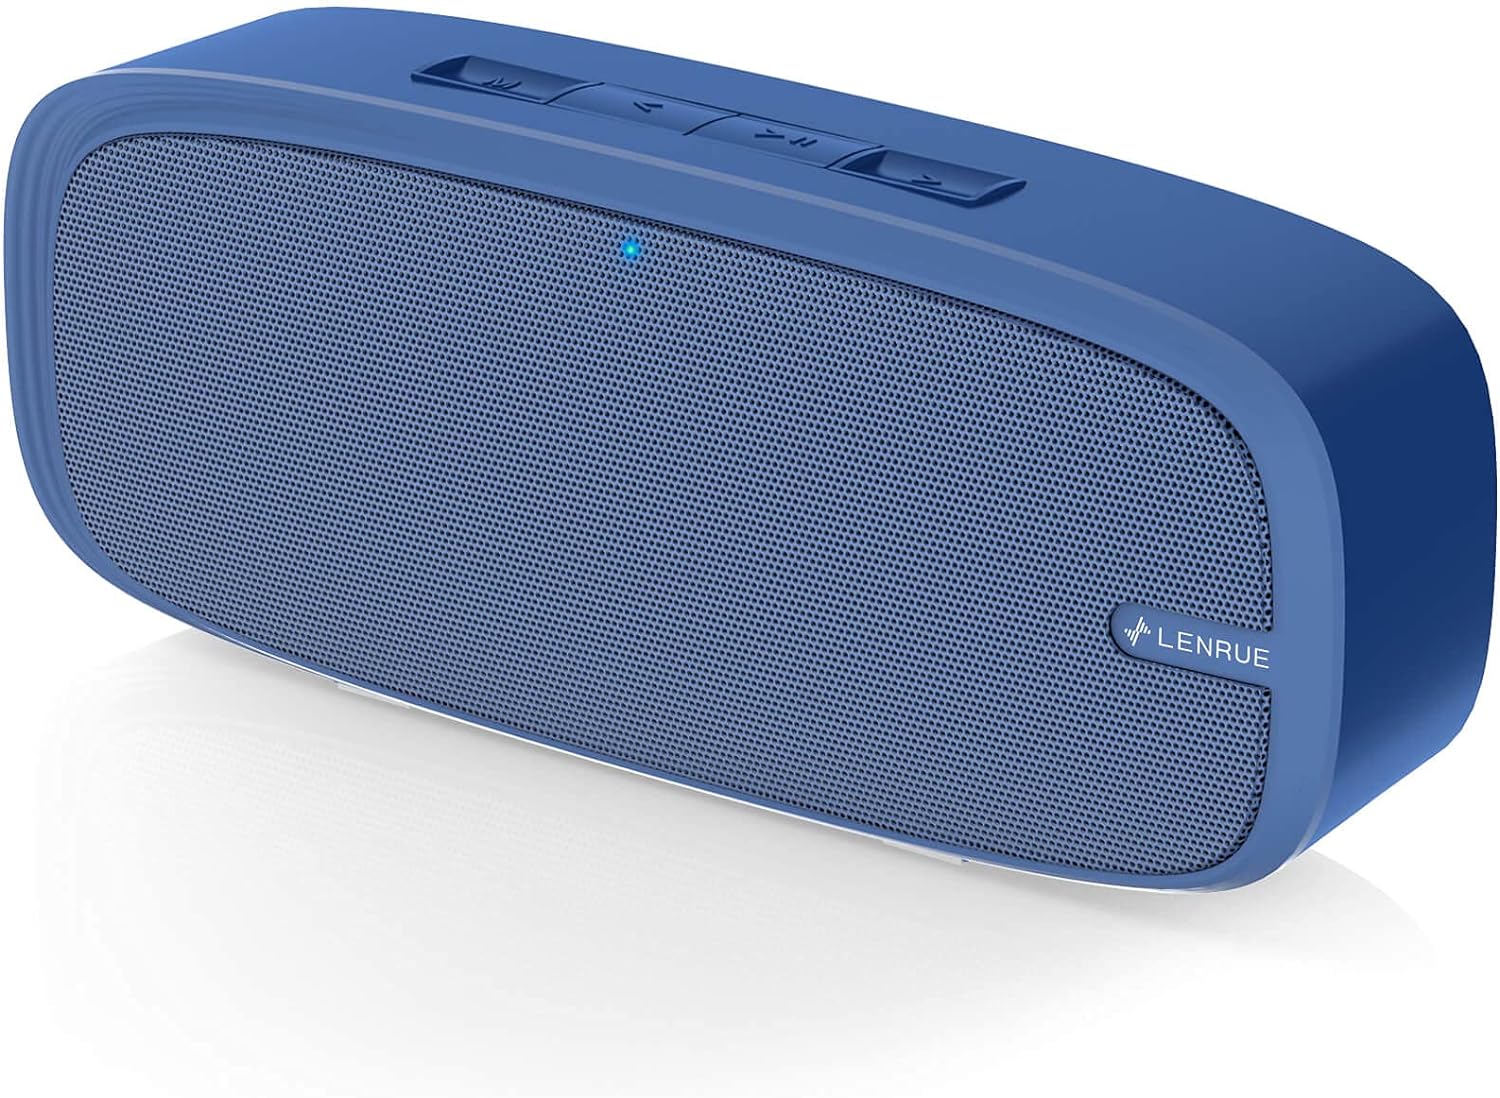 LENRUE Bluetooth Speaker, Wireless Portable Speaker with Loud Stereo Sound, Rich Bass, 12-Hour Playtime, Built-in Mic. Perfect for iPhone, Samsung and More (Blue)